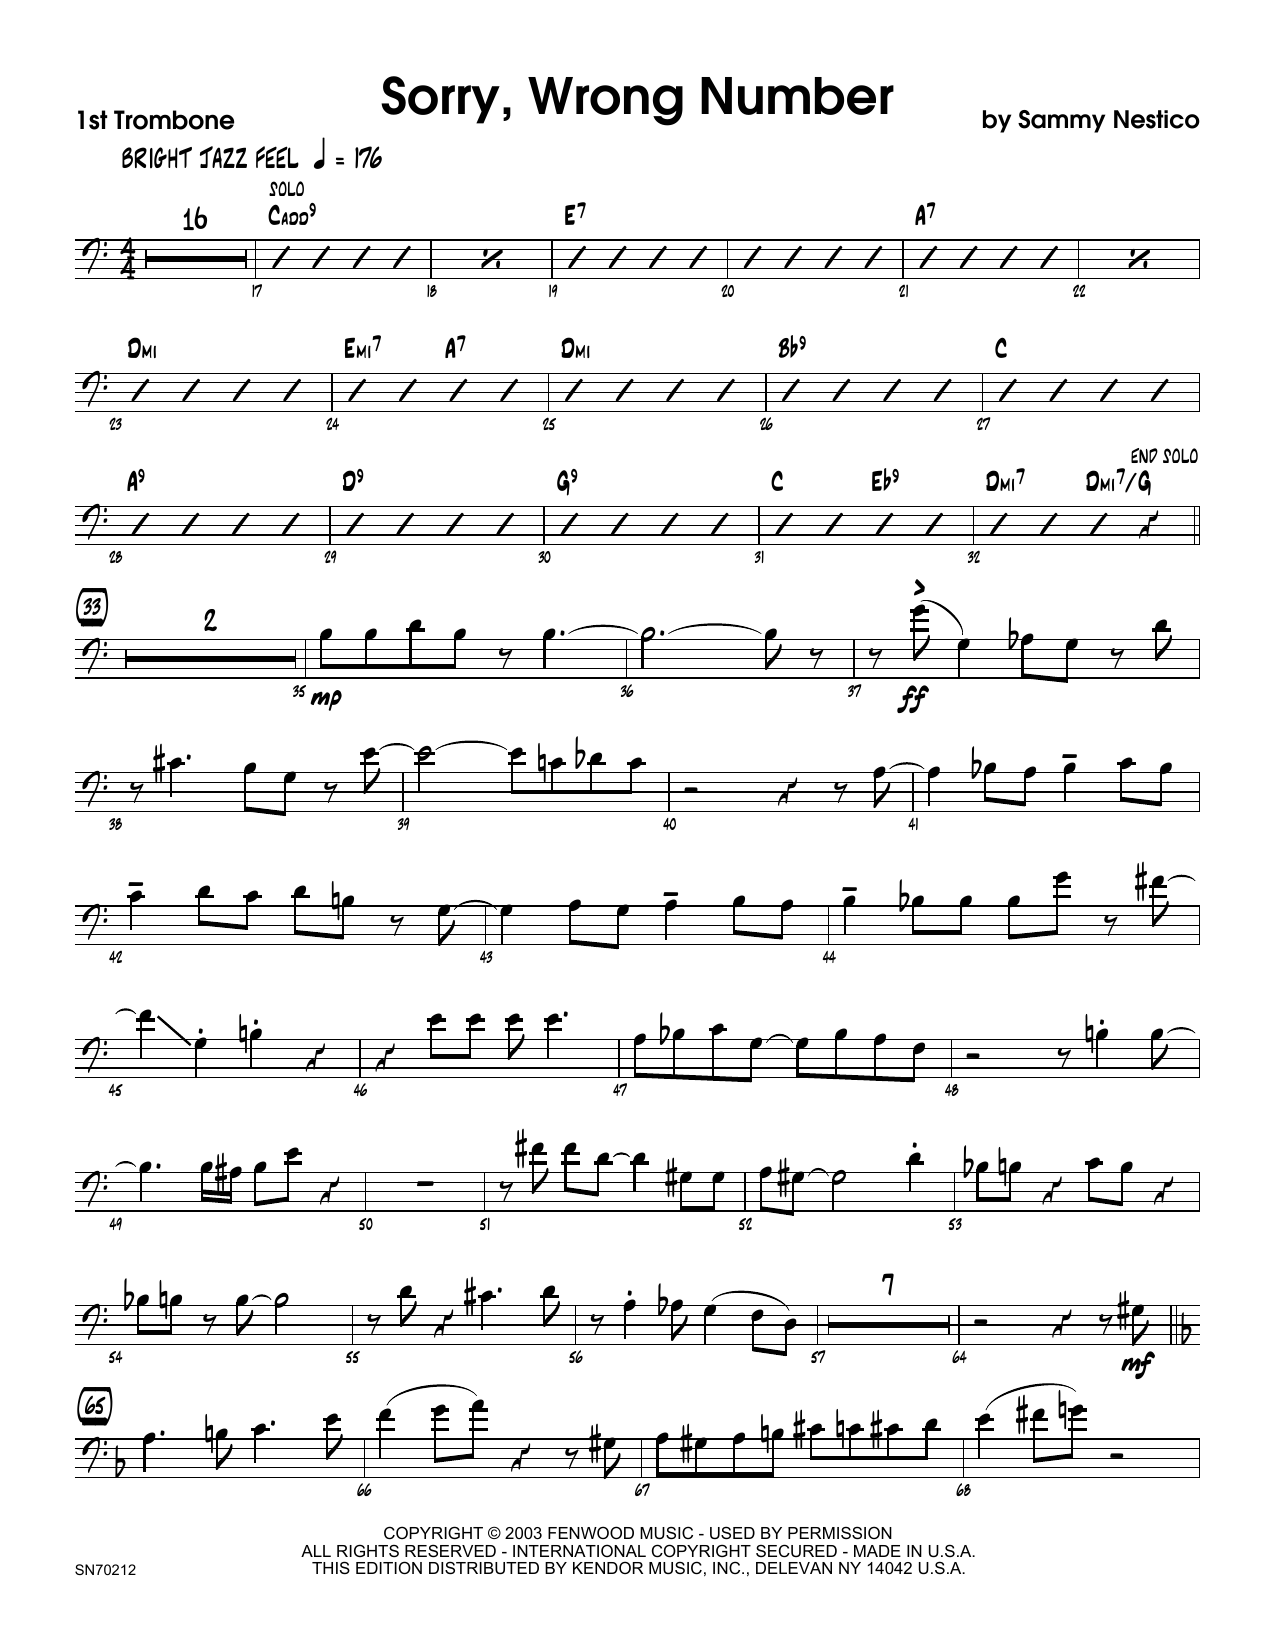 Download Sammy Nestico Sorry, Wrong Number - 1st Trombone Sheet Music